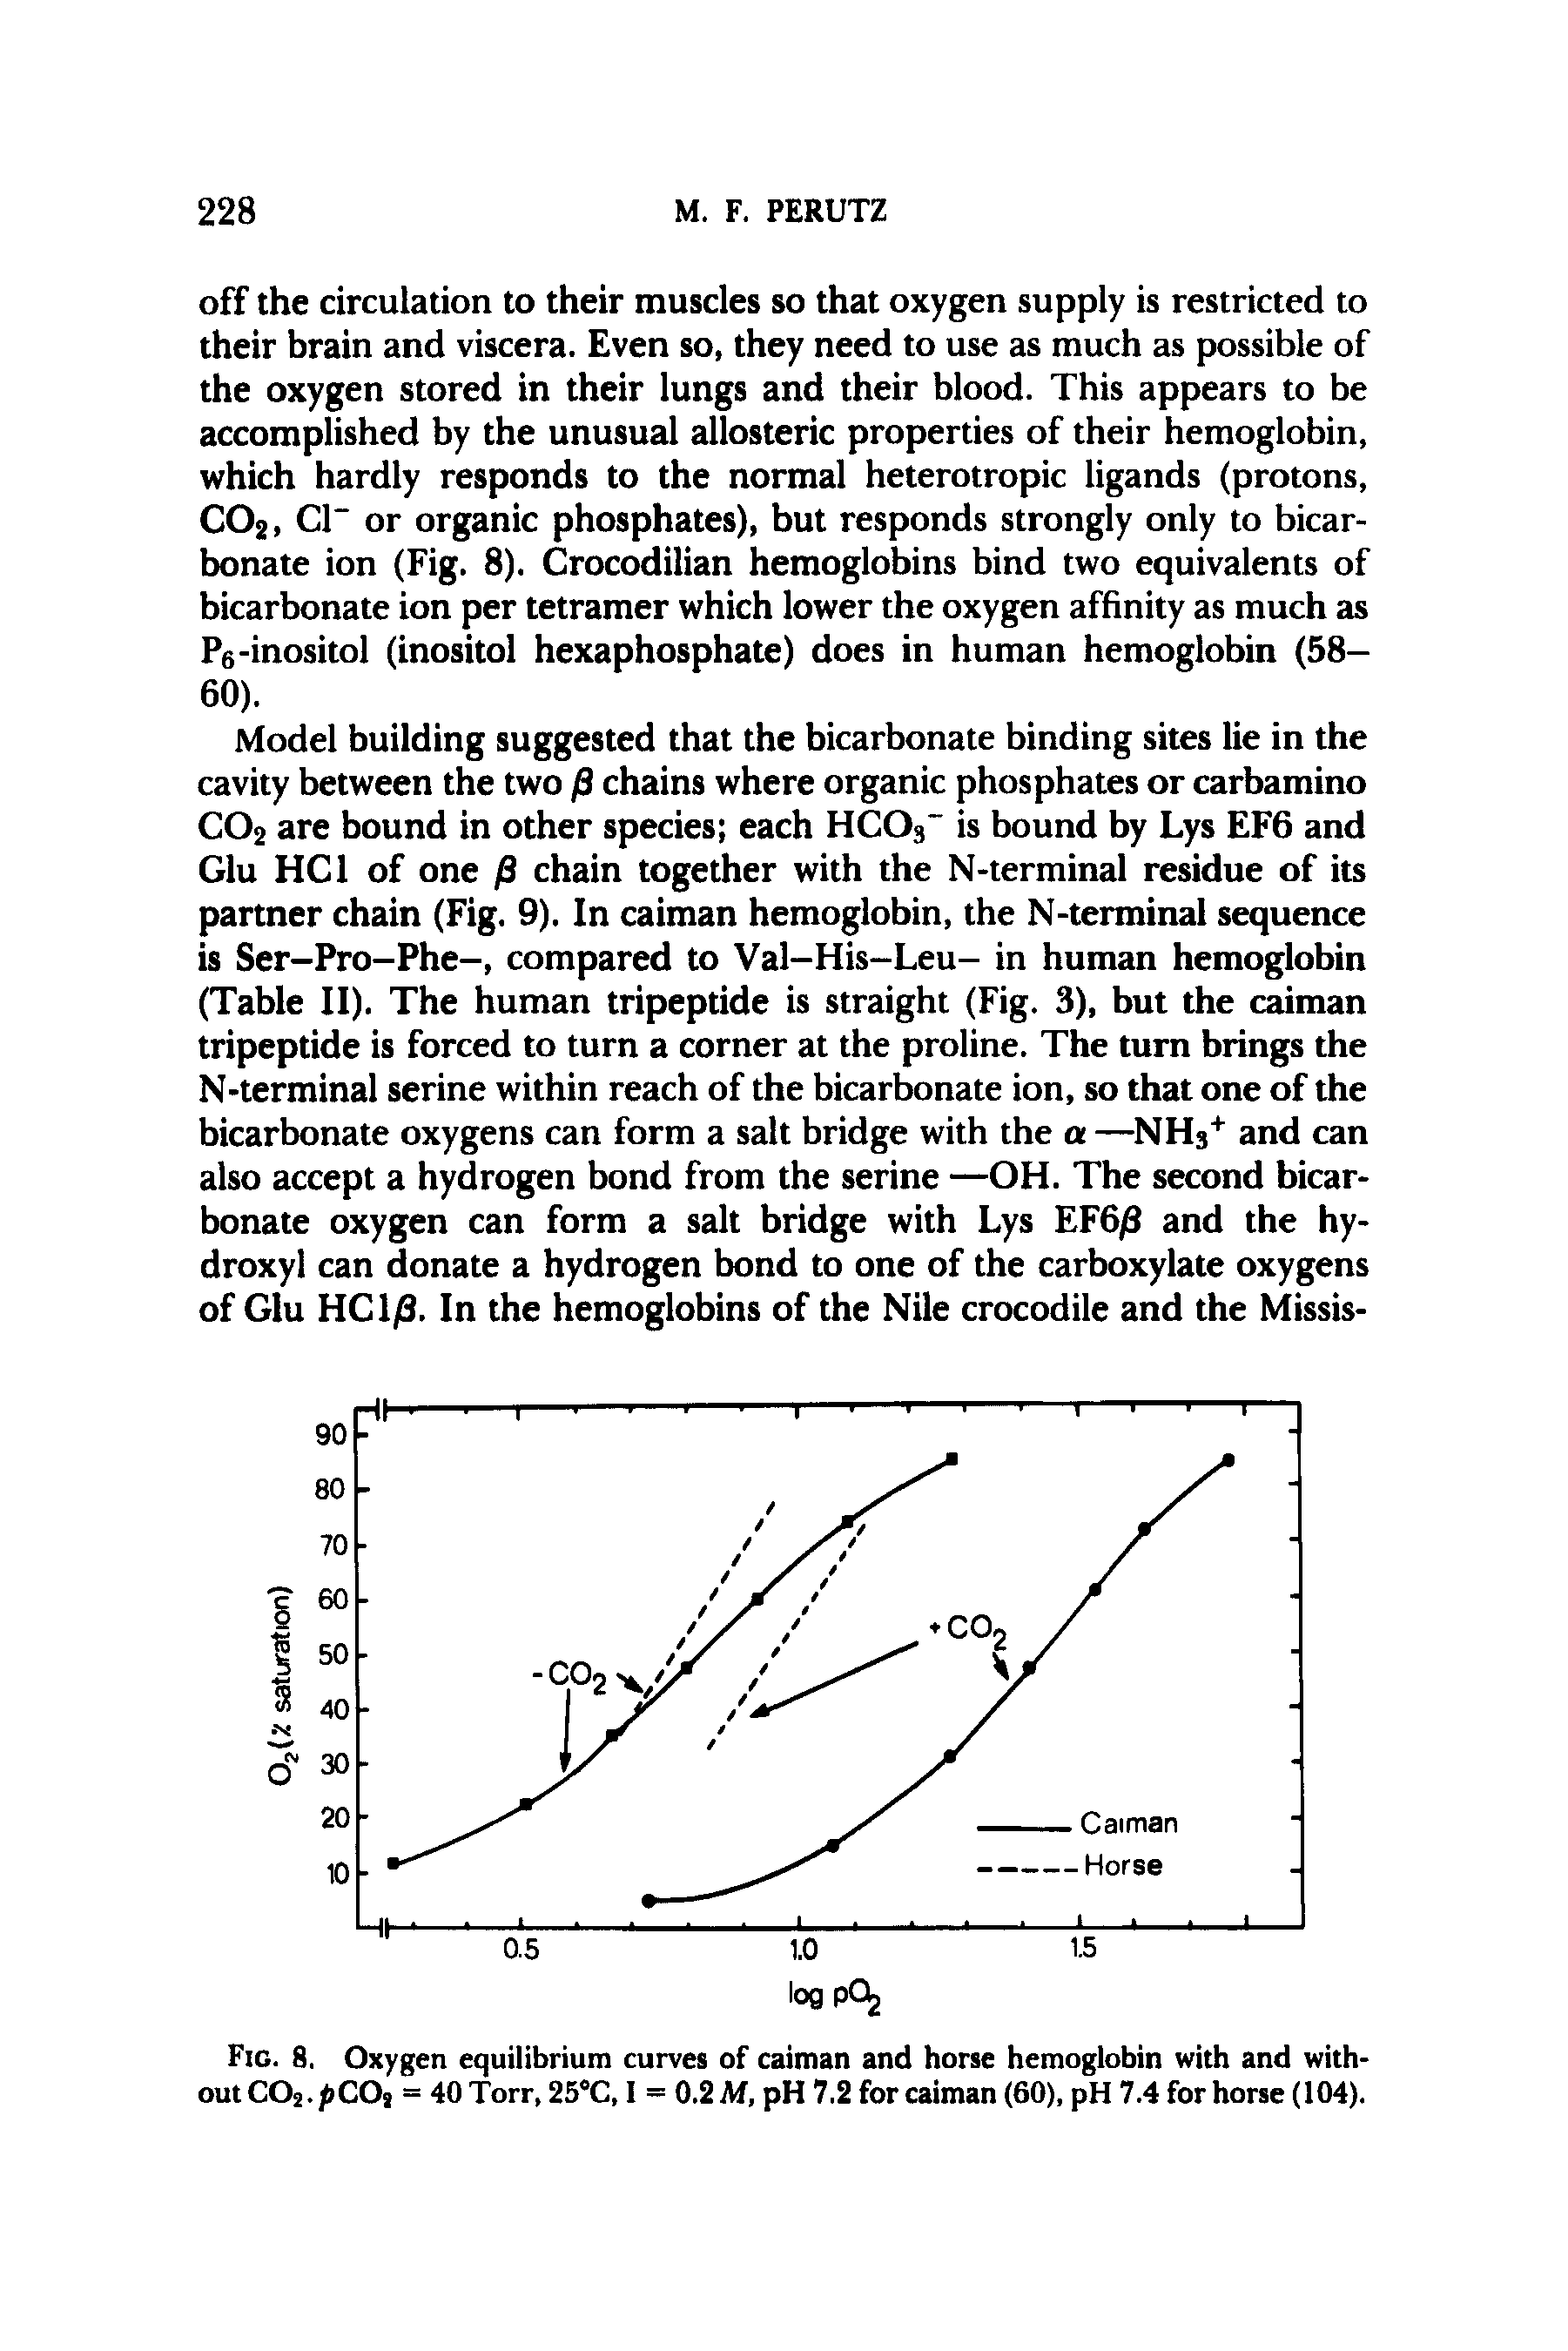 Fig. 8. Oxygen equilibrium curves of caiman and horse hemoglobin with and without C02. C0] = 40Torr, 25°C, I = 0.2 M, pH 7,2 for caiman (60), pH 7.4 for horse (104).